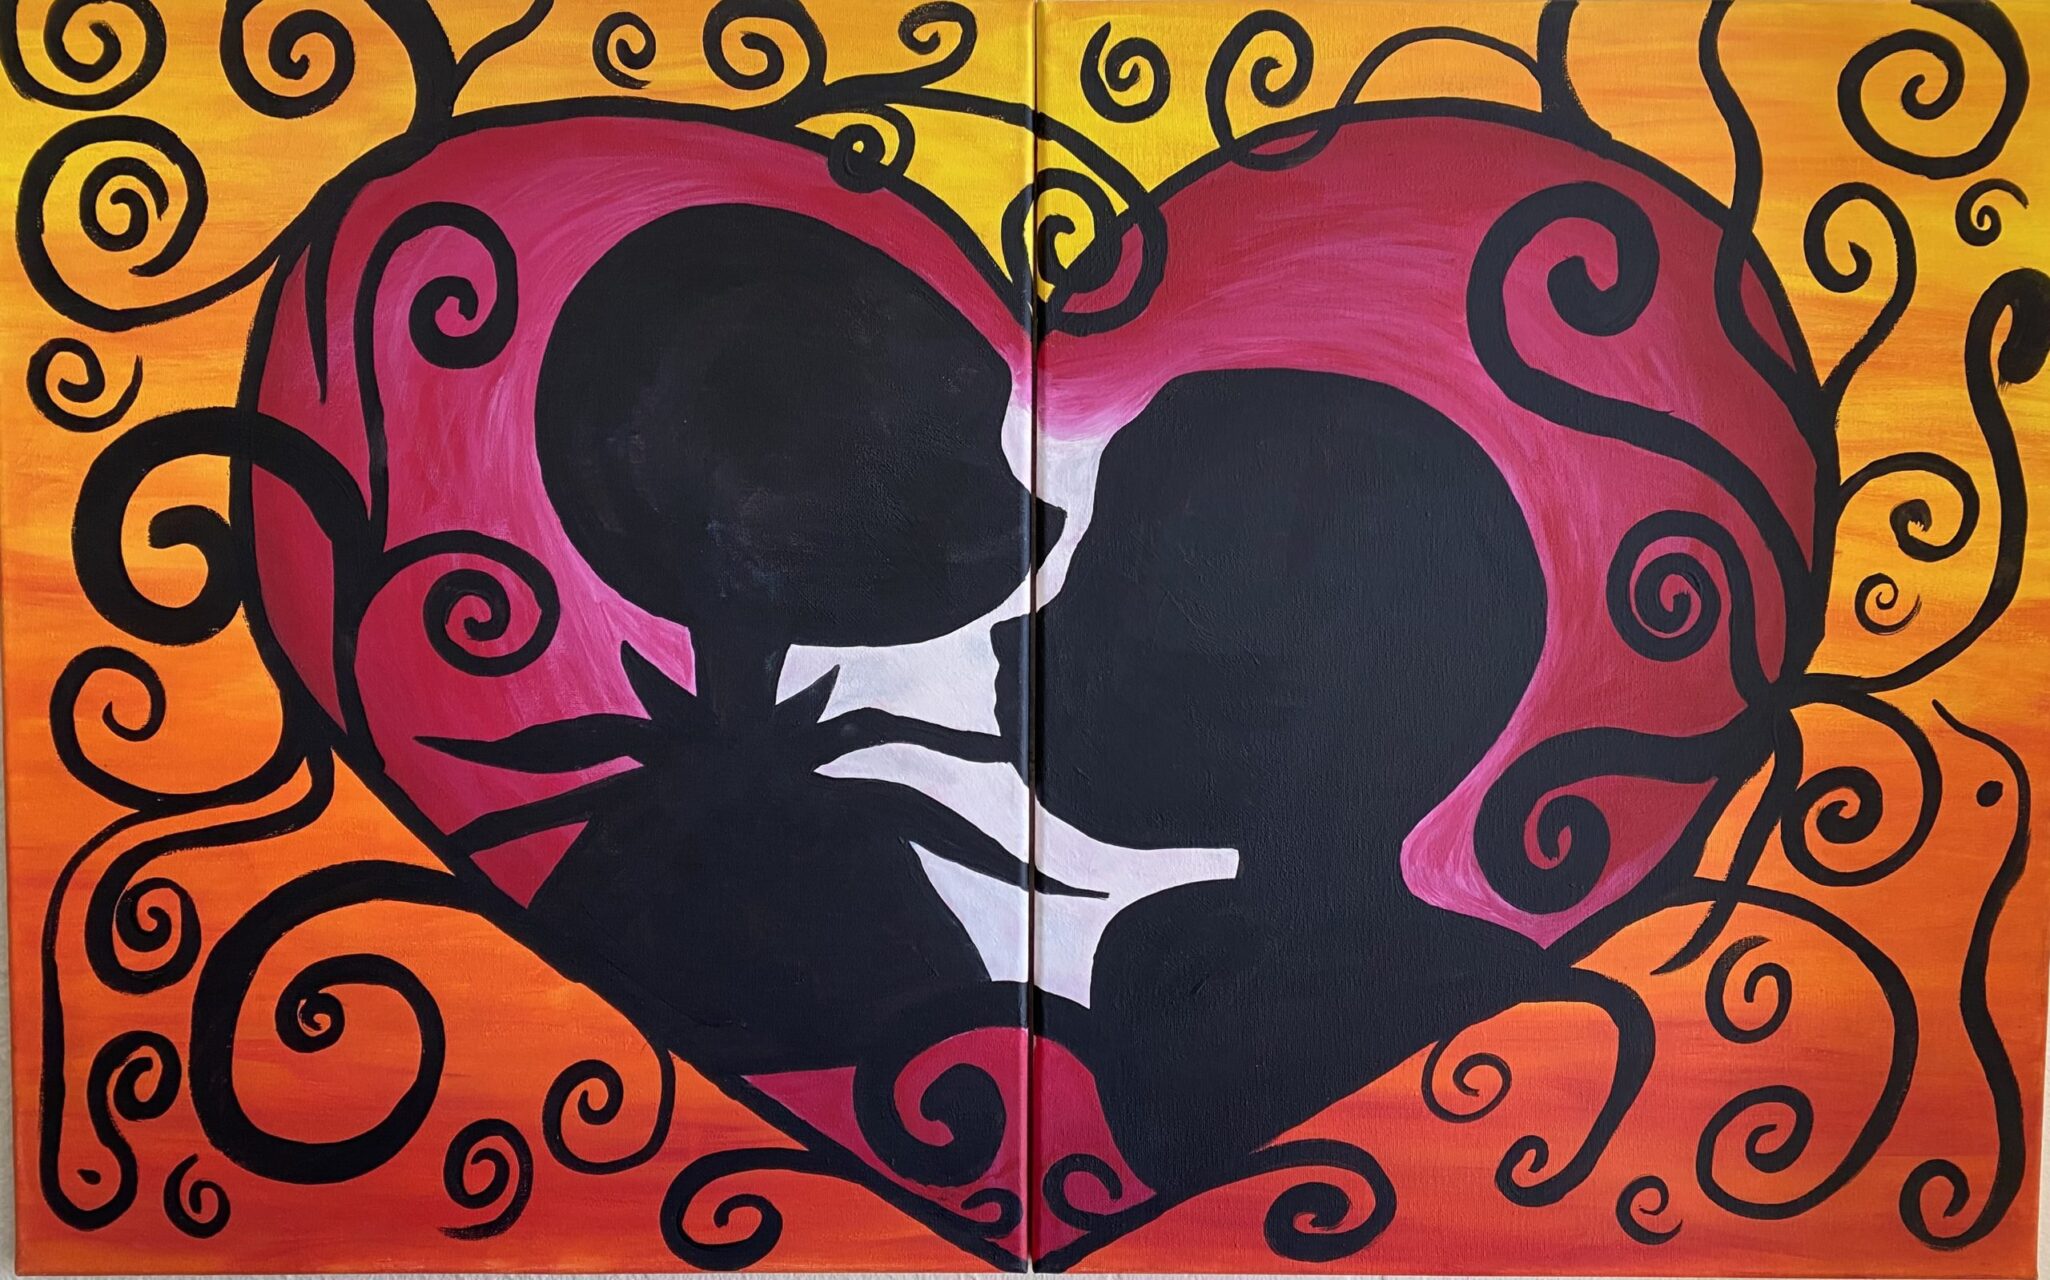 Image of painting called Celebrate Valentine's day with this fun couples paint and sip painting in Rocklin, Jack and Sally